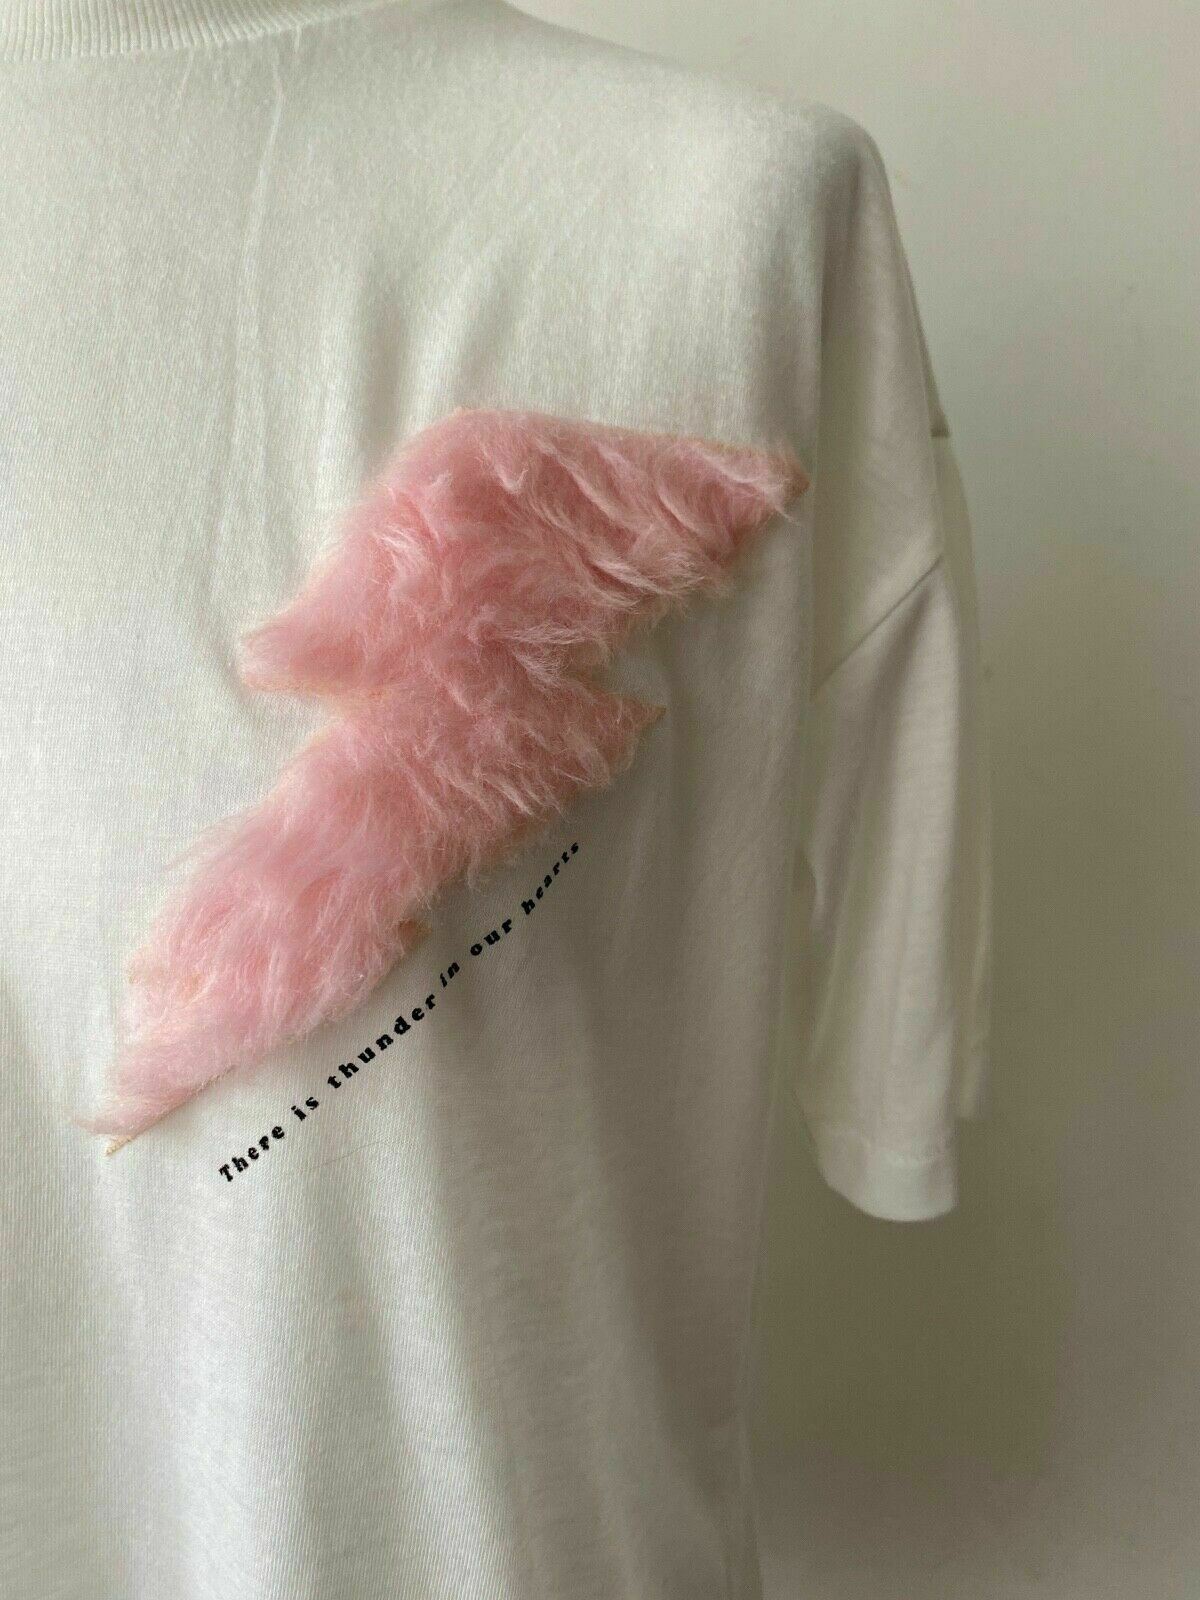 ONLY White T-Shirt With Pink Furry Lightning Box Motif Size M Pit to Pit 21"